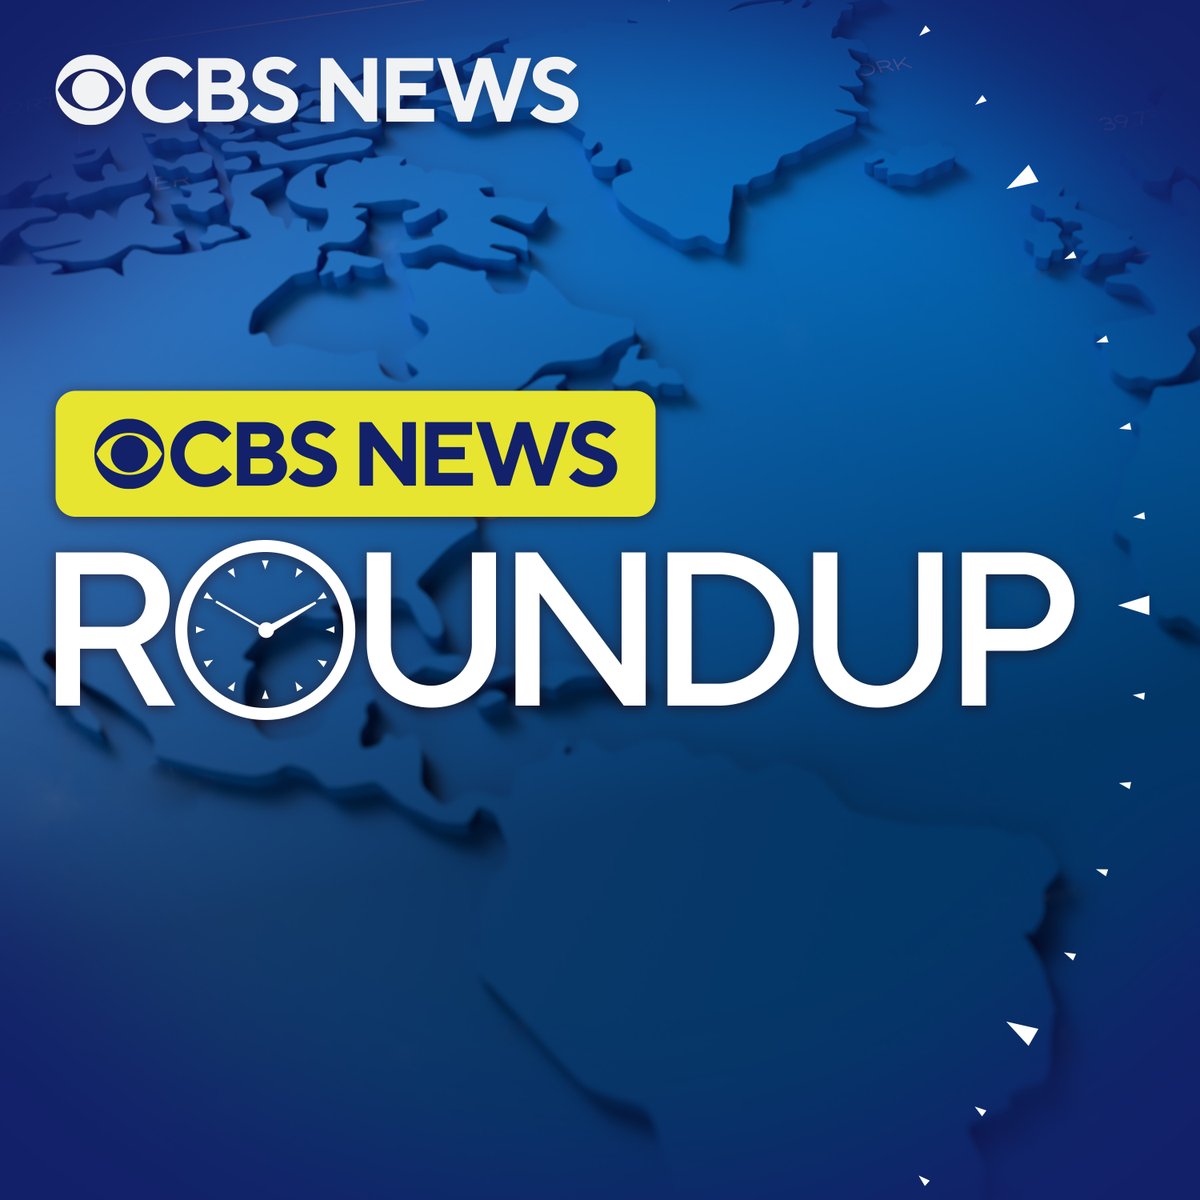 On the @CBSNews Weekend Roundup with @PeterKingCBS: ▪️ Aid workers in Gaza killed @HollyMAWilliams ▪️ Baltimore bridge collapse affecting businesses @krisvancleave ▪️ Black performers in country music ..and more. Listen: link.chtbl.com/cbs-news-round…